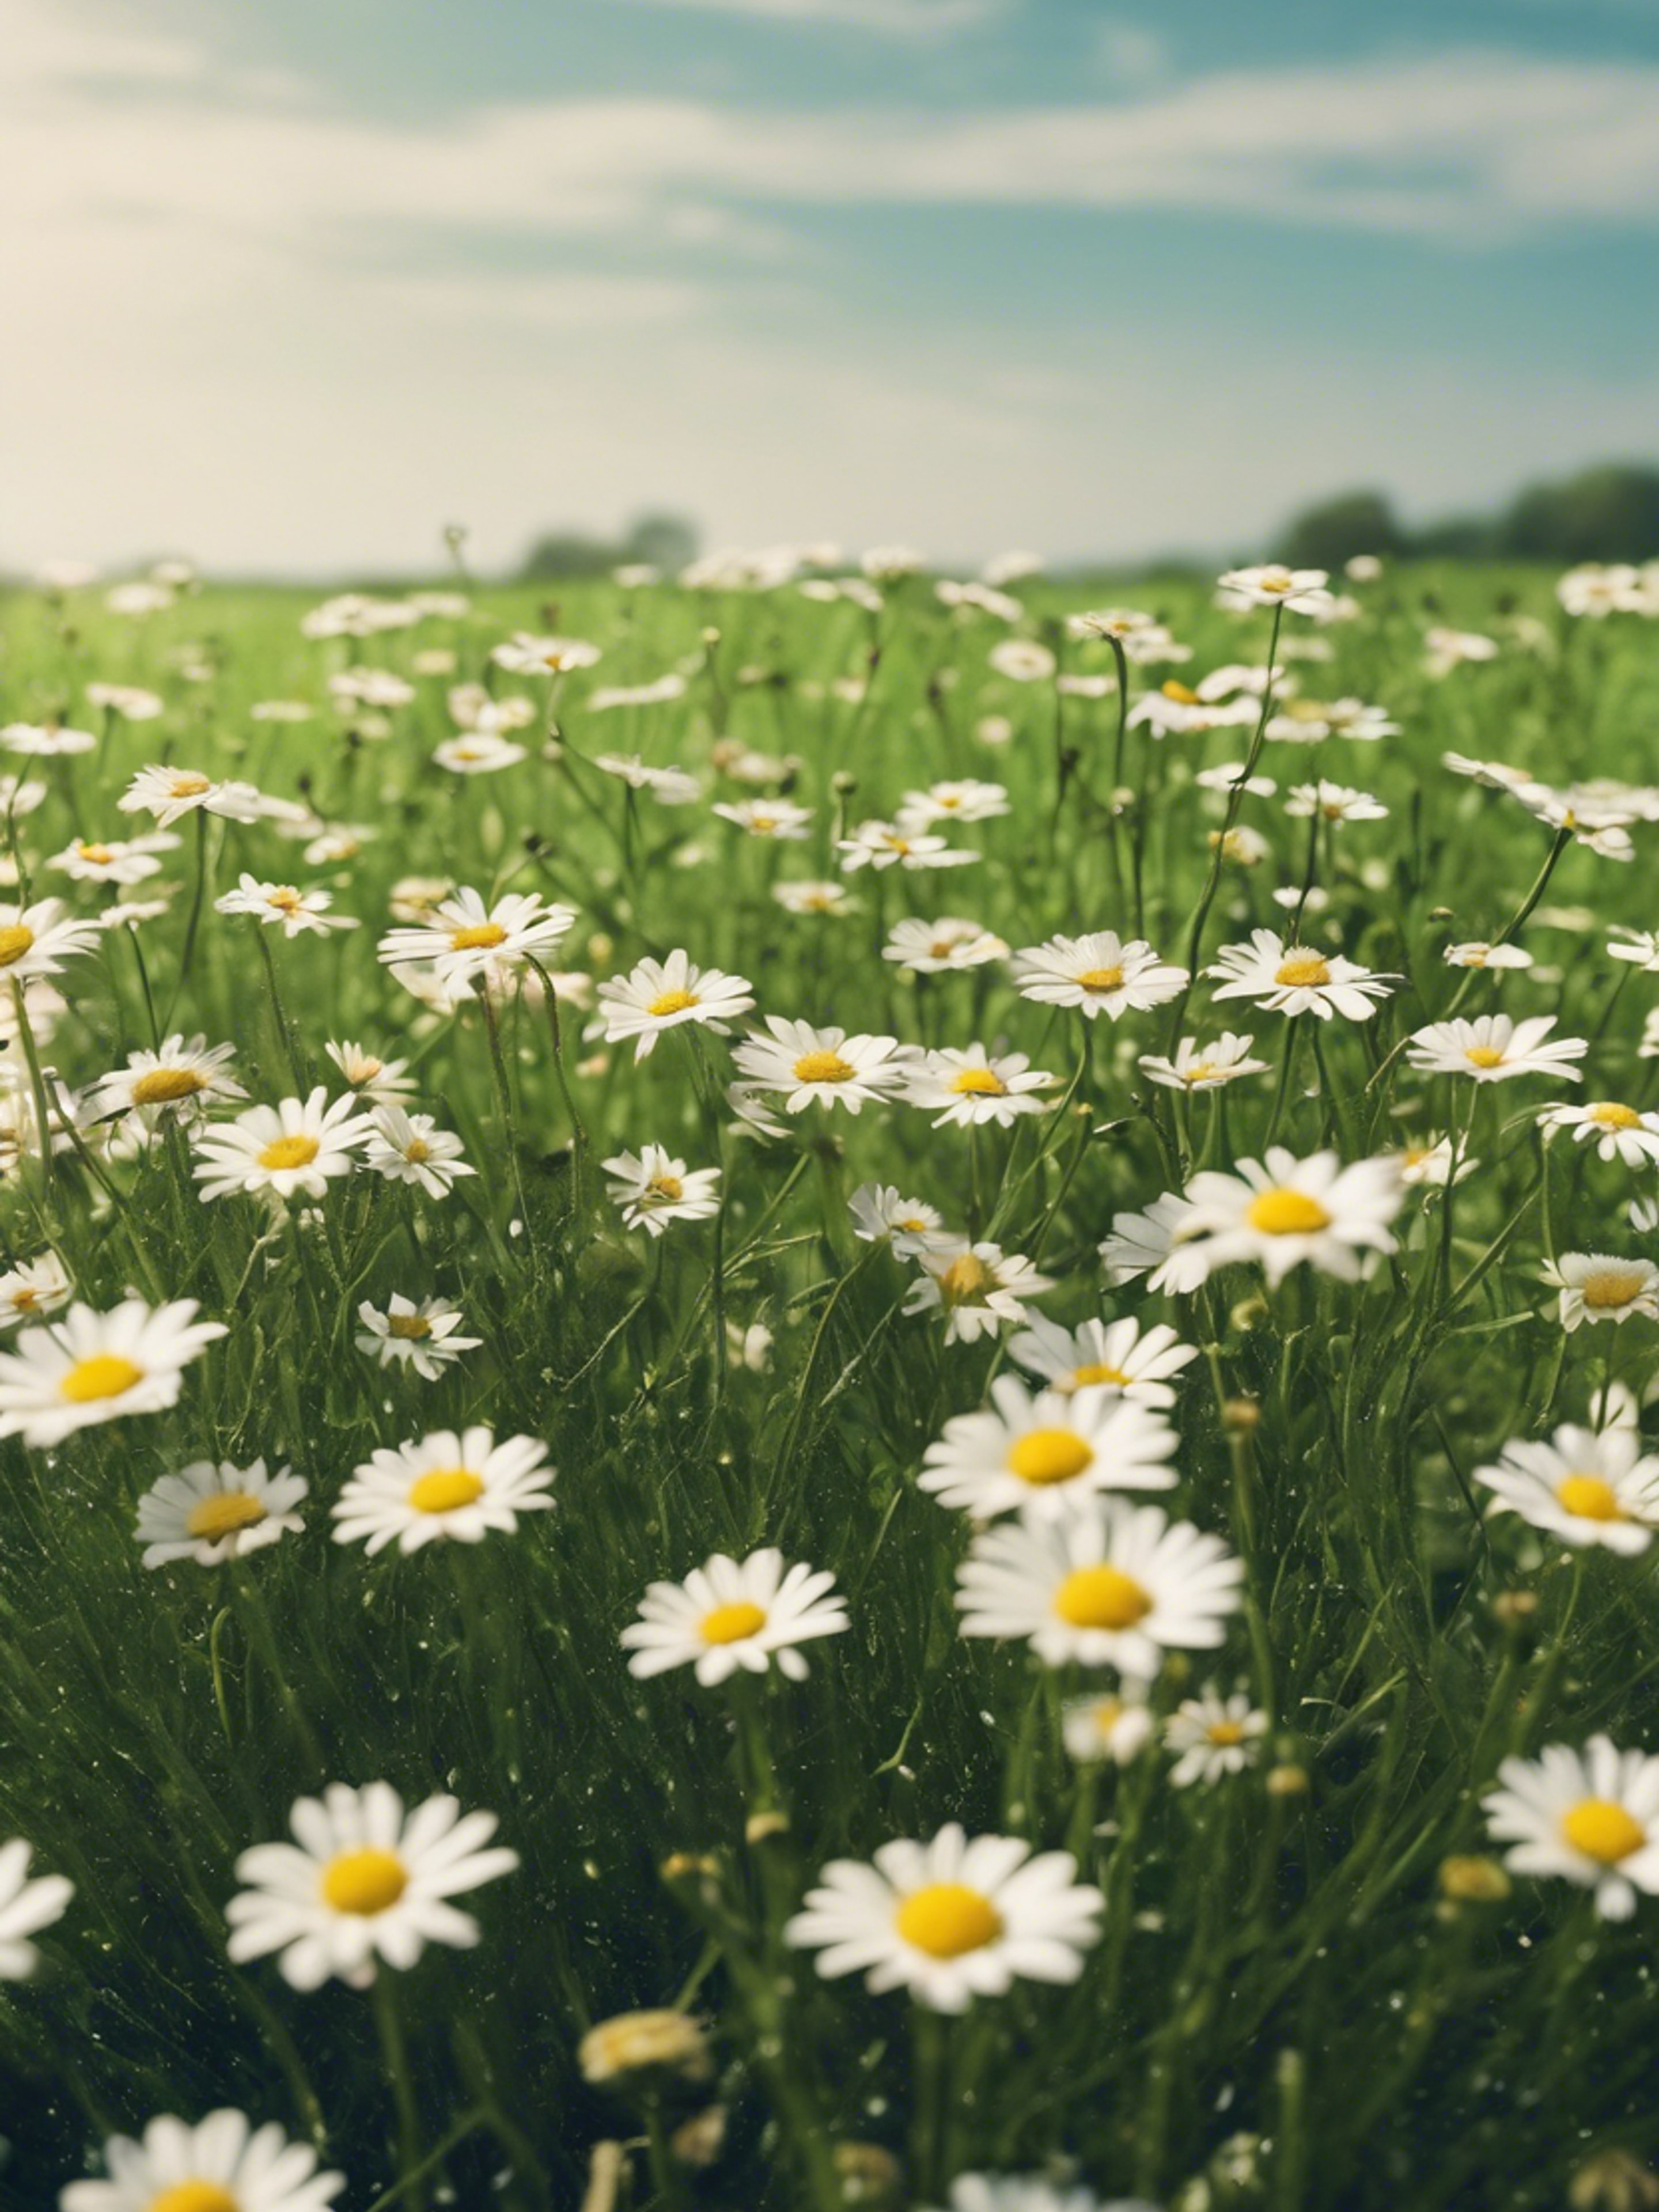 A cool green field sprinkled with daisies under a morning sky. Tapet[e270184600e04e908453]